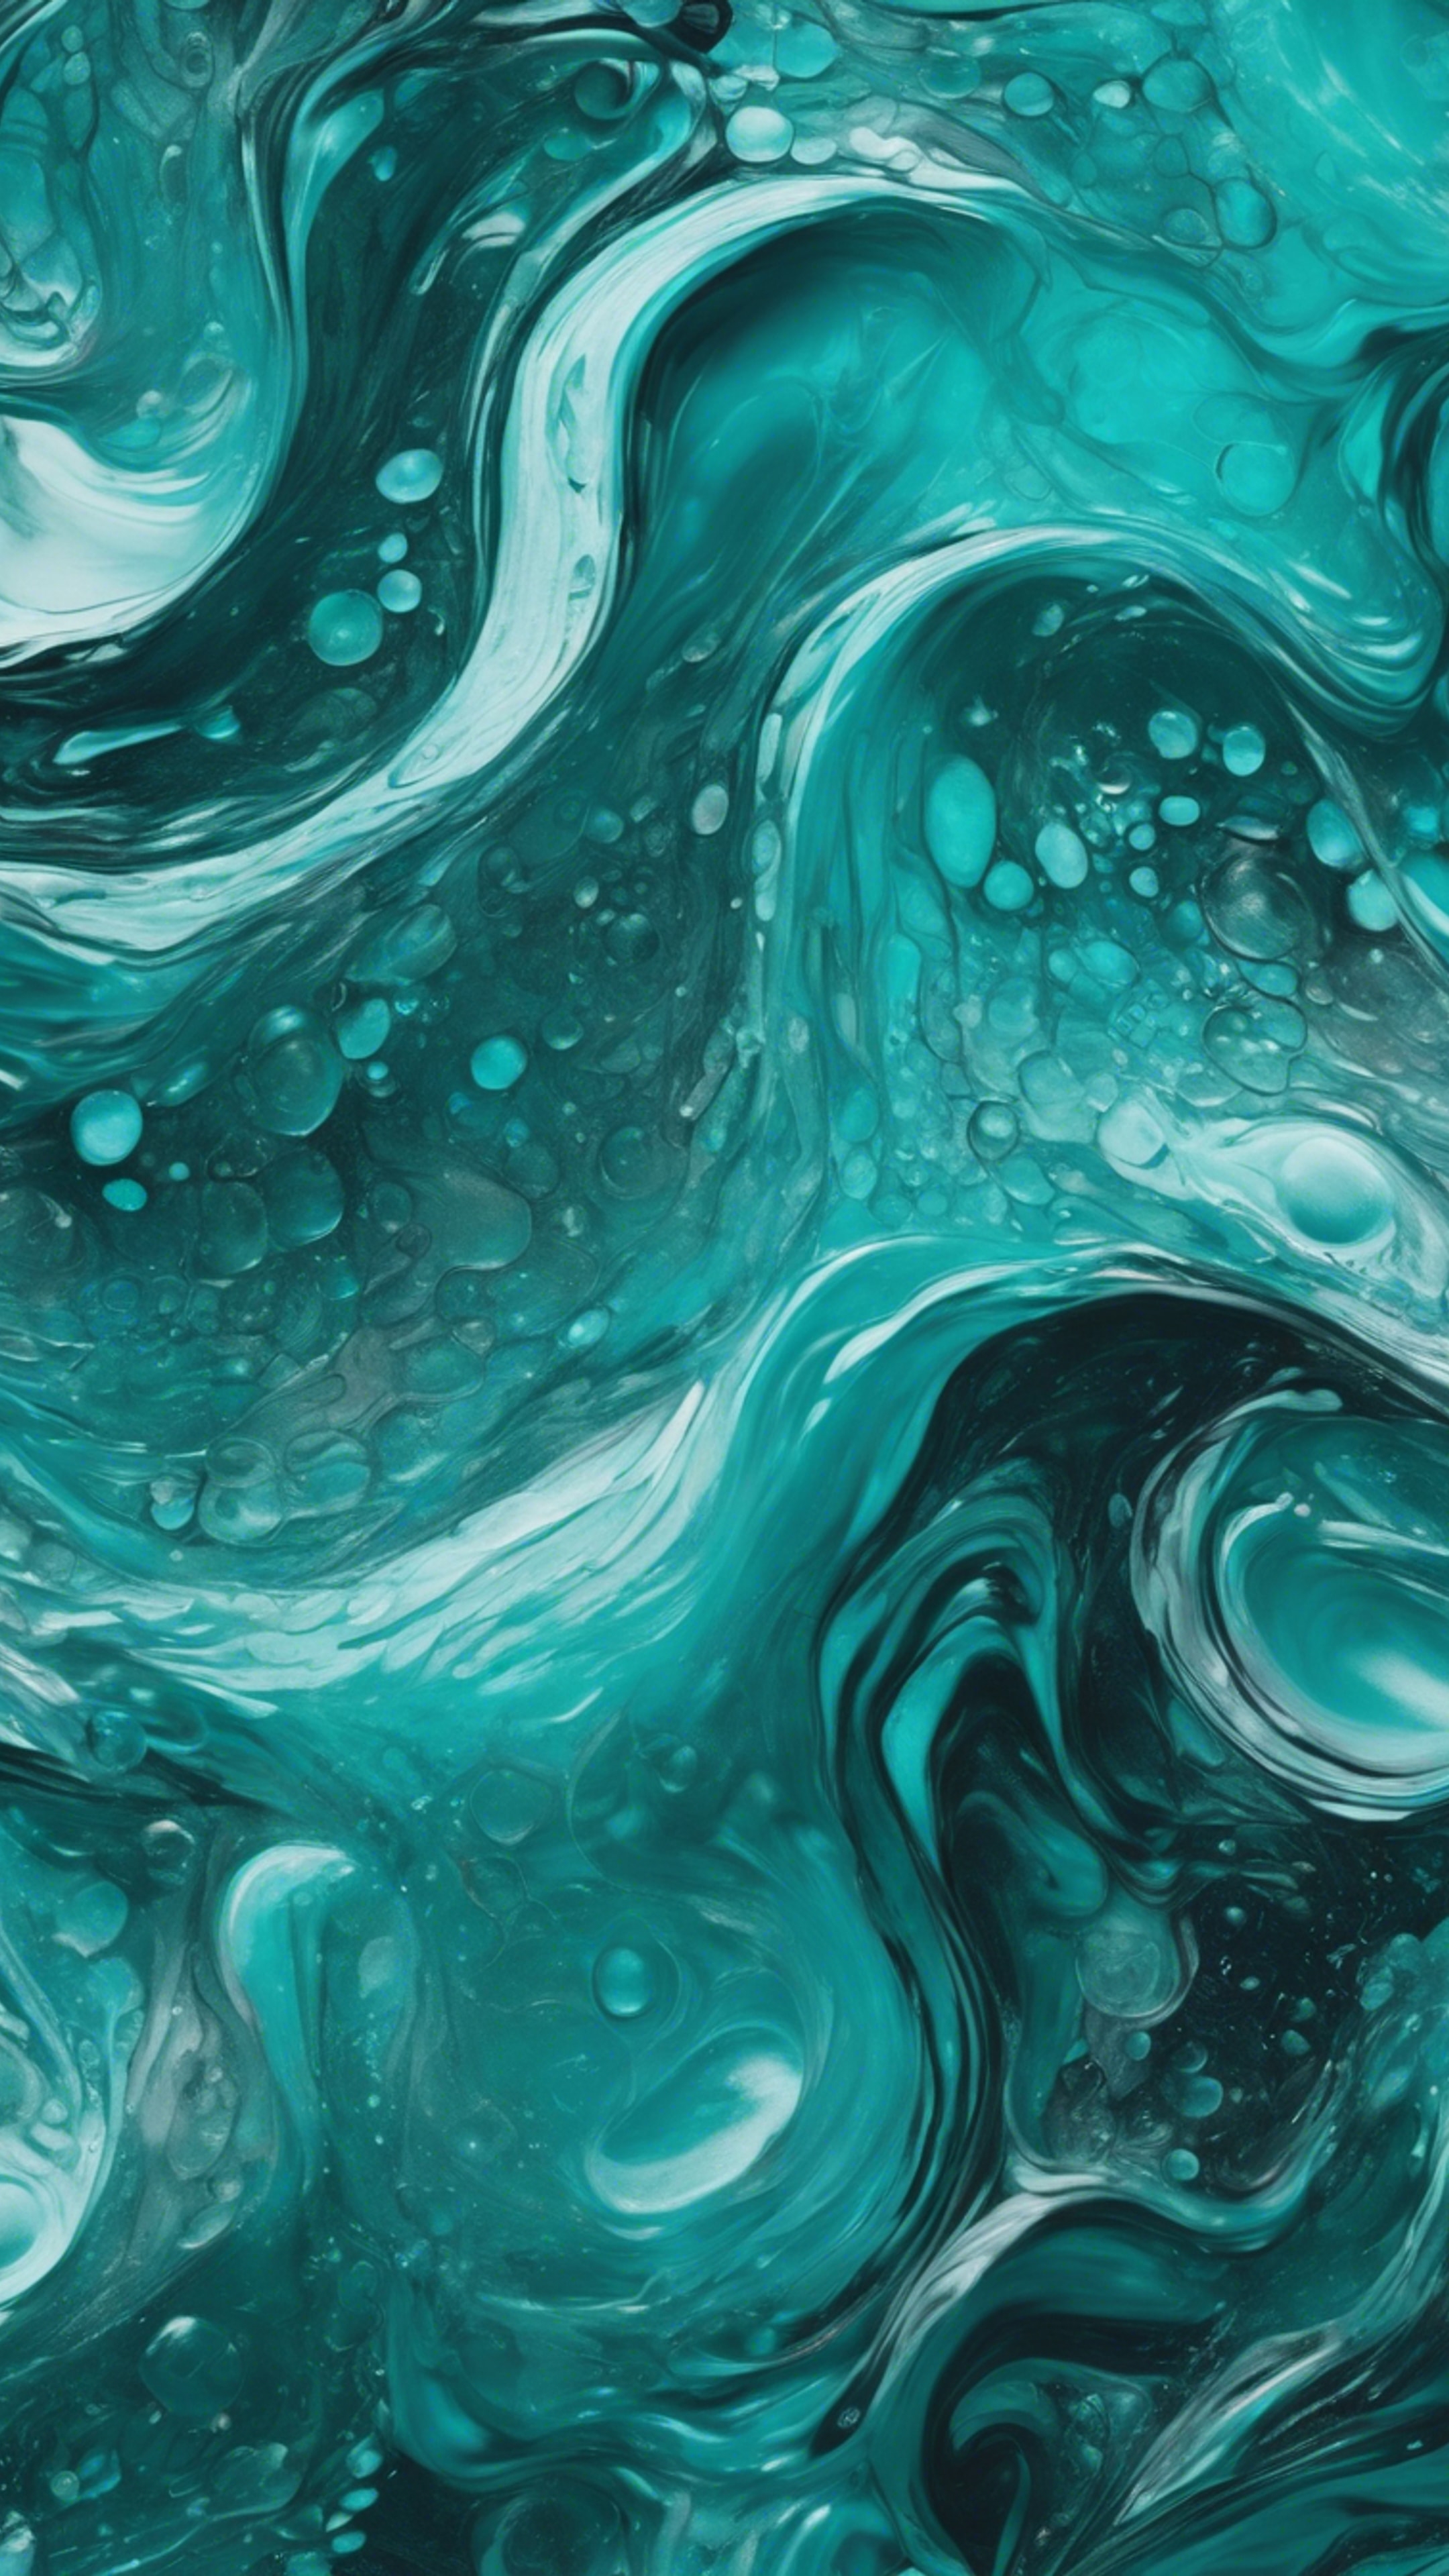 Abstract painting with swirling waves of shades of cool teal. Tapet[053c1b1ade8044ef8a45]